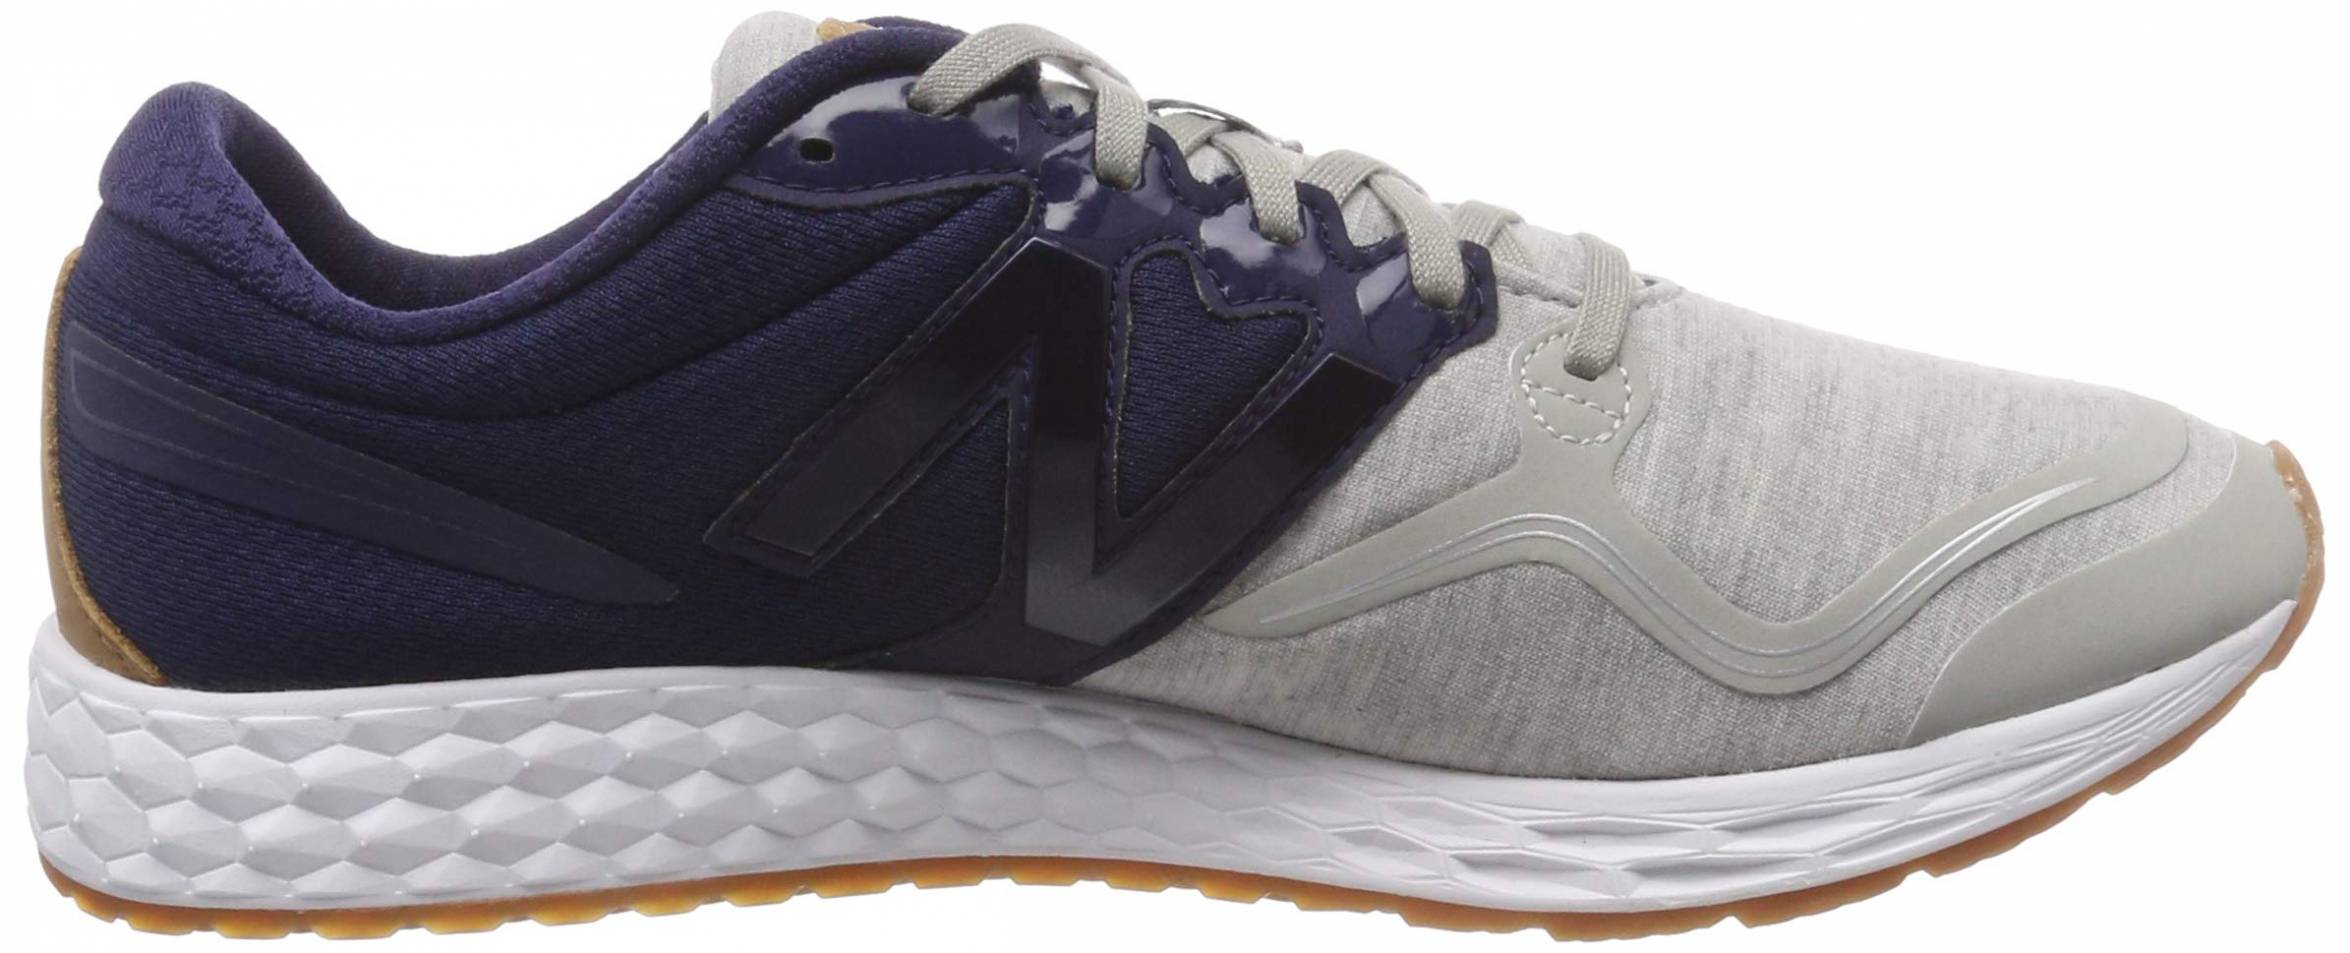 best new balance shoes for lower back pain